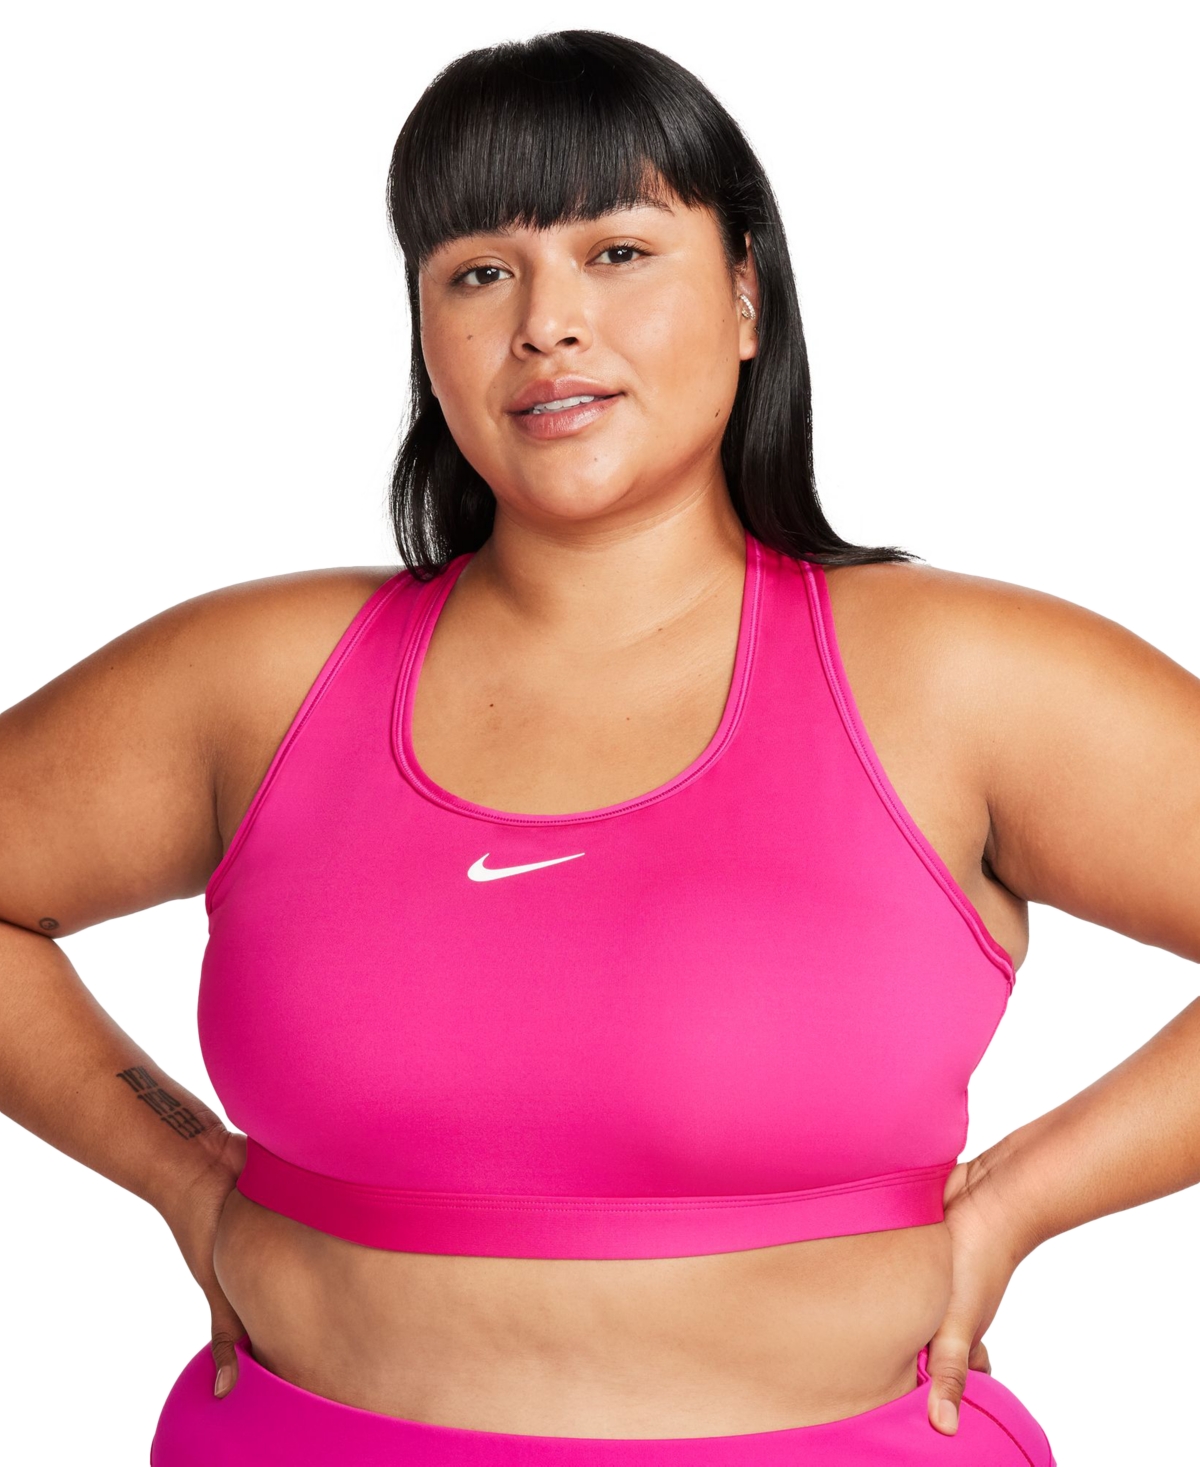 Nike Air Training Indy light support strappy sports bra in hot pink